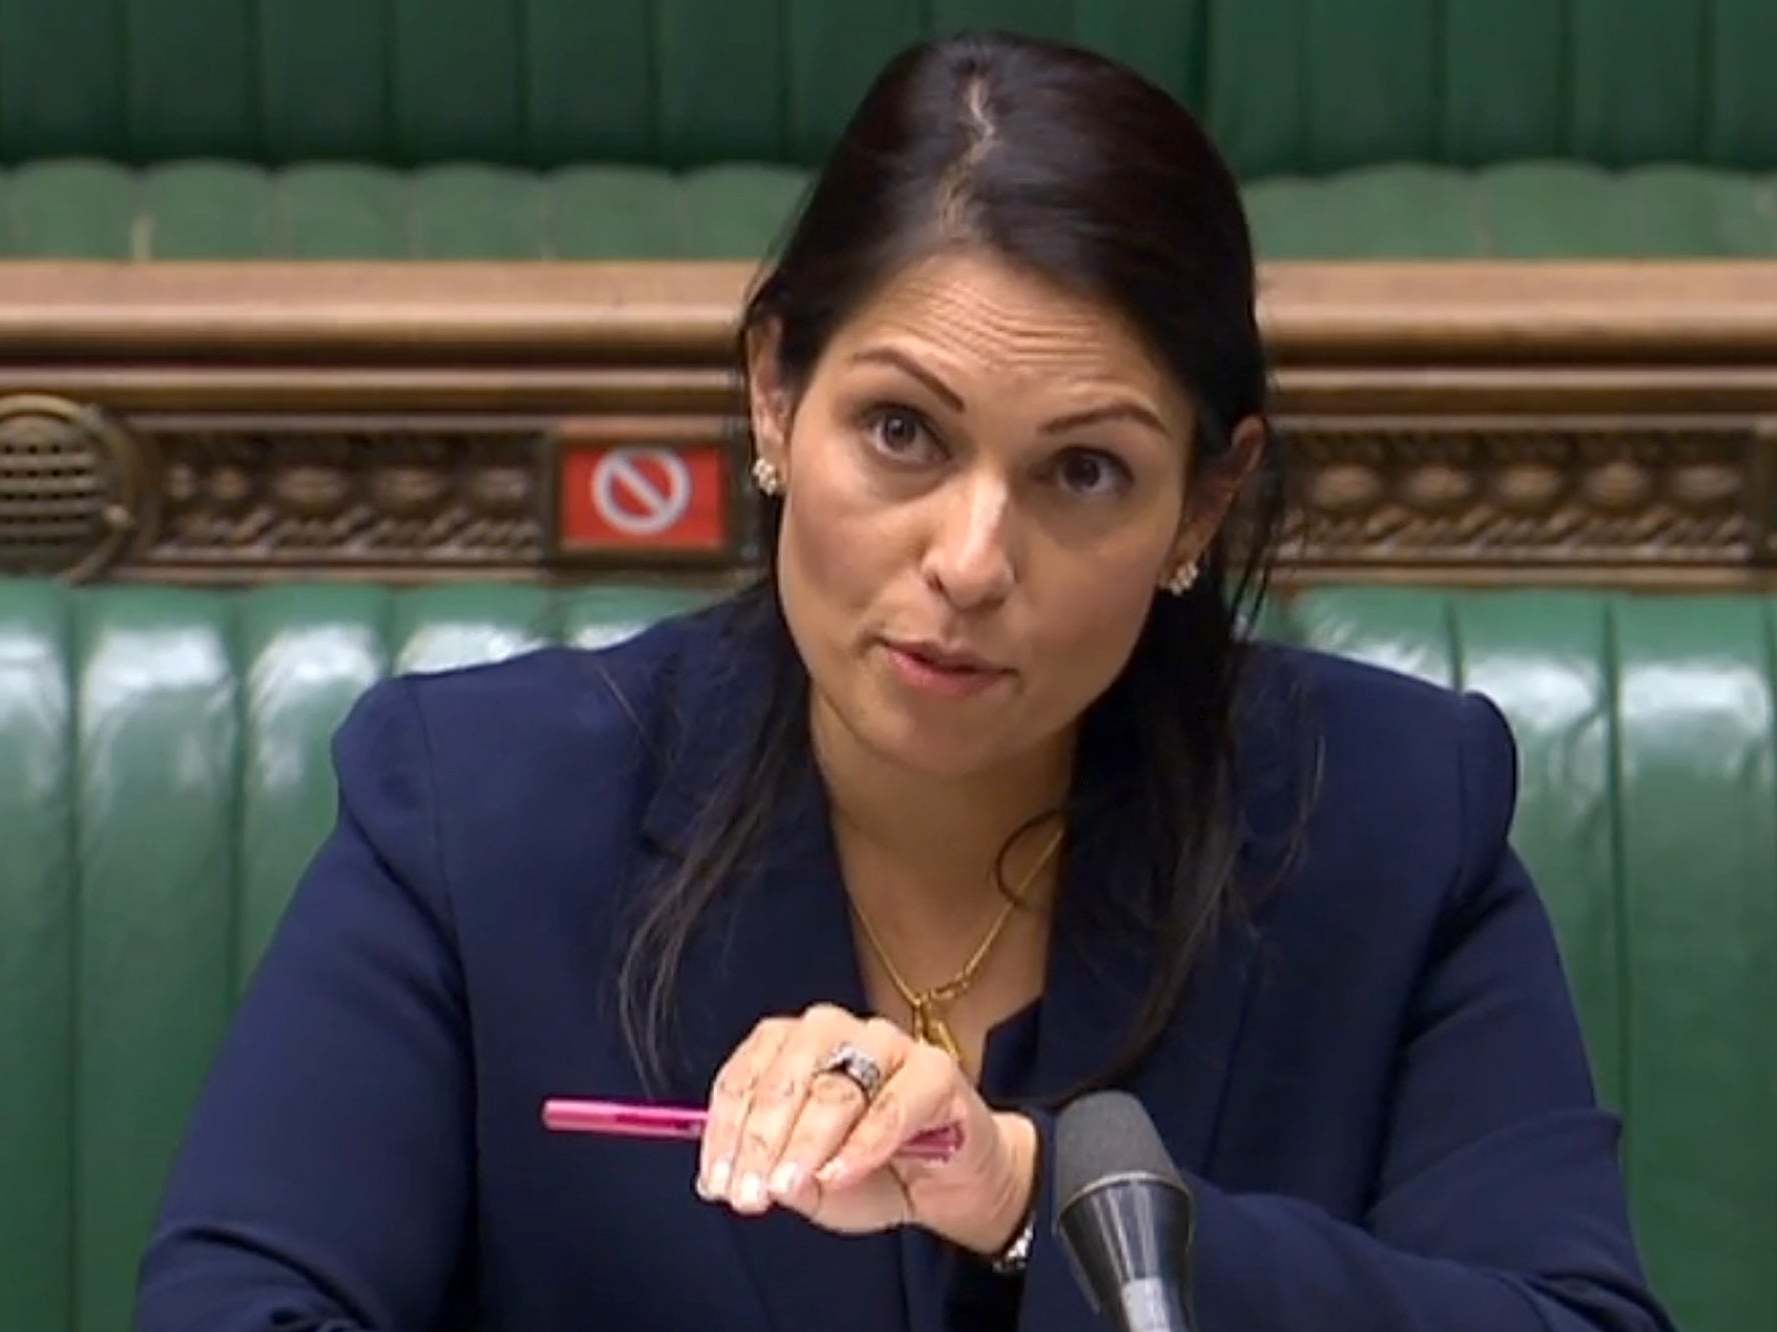 Priti Patel has been heralded by some on social media as the poster girl for feminism